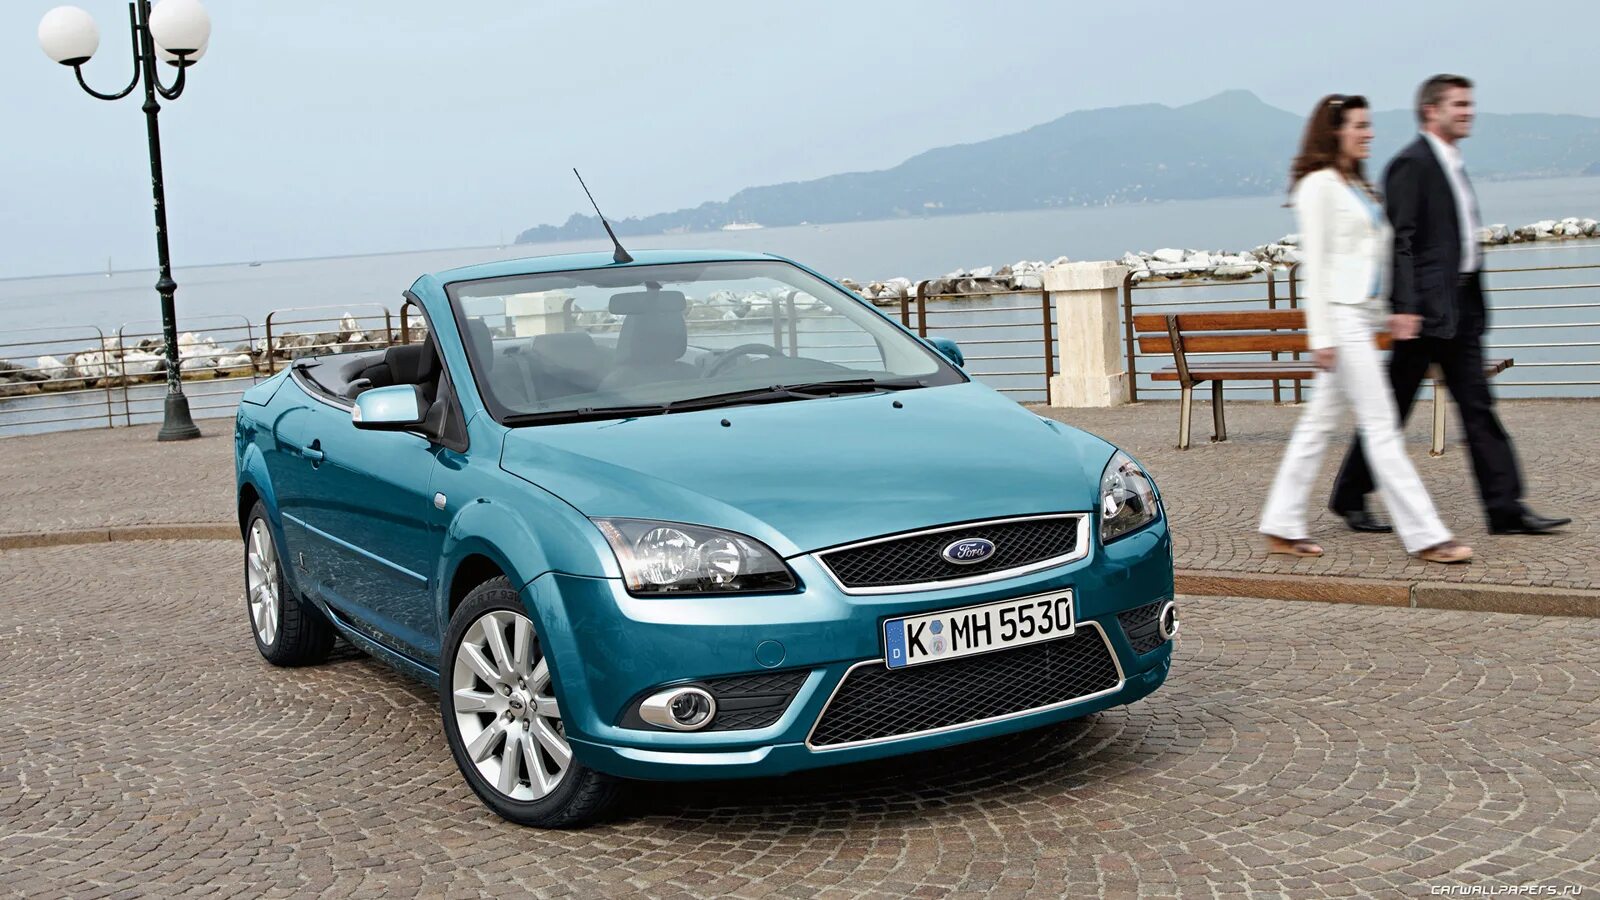 Ford Focus Cabriolet 2008. Ford Focus Coupe-Cabriolet. Форт фокус кабреолет 2006. Форд фокус 2 кабриолет